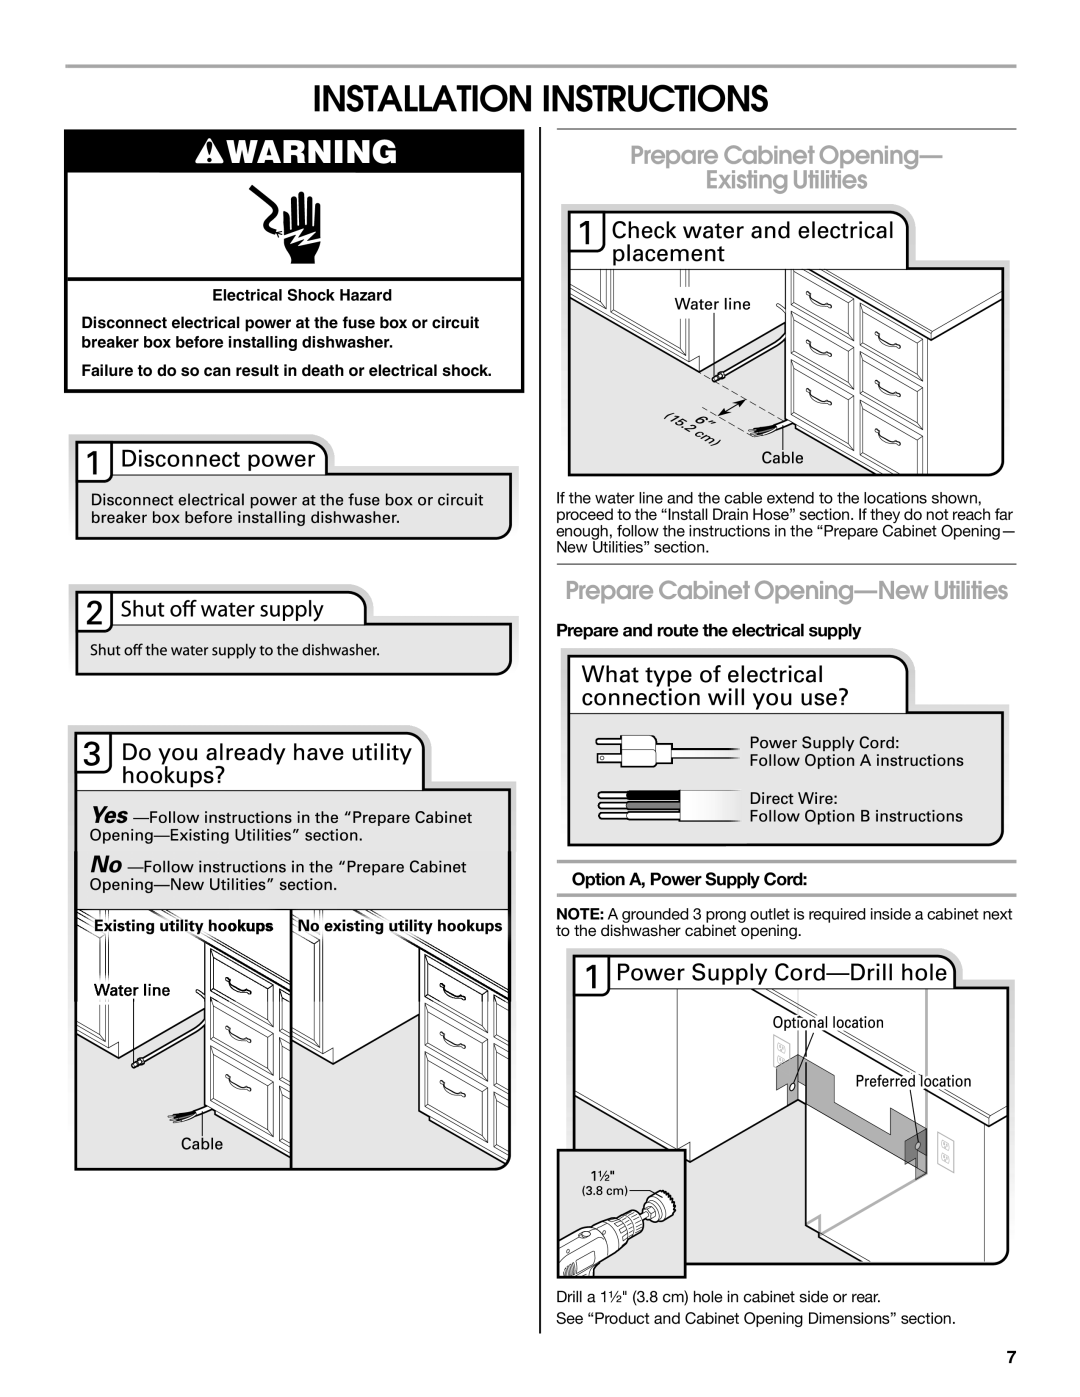 Maytag W10401504D Installation Instructions, Prepare Cabinet Opening Existing Utilities, Option A, Power Supply Cord 